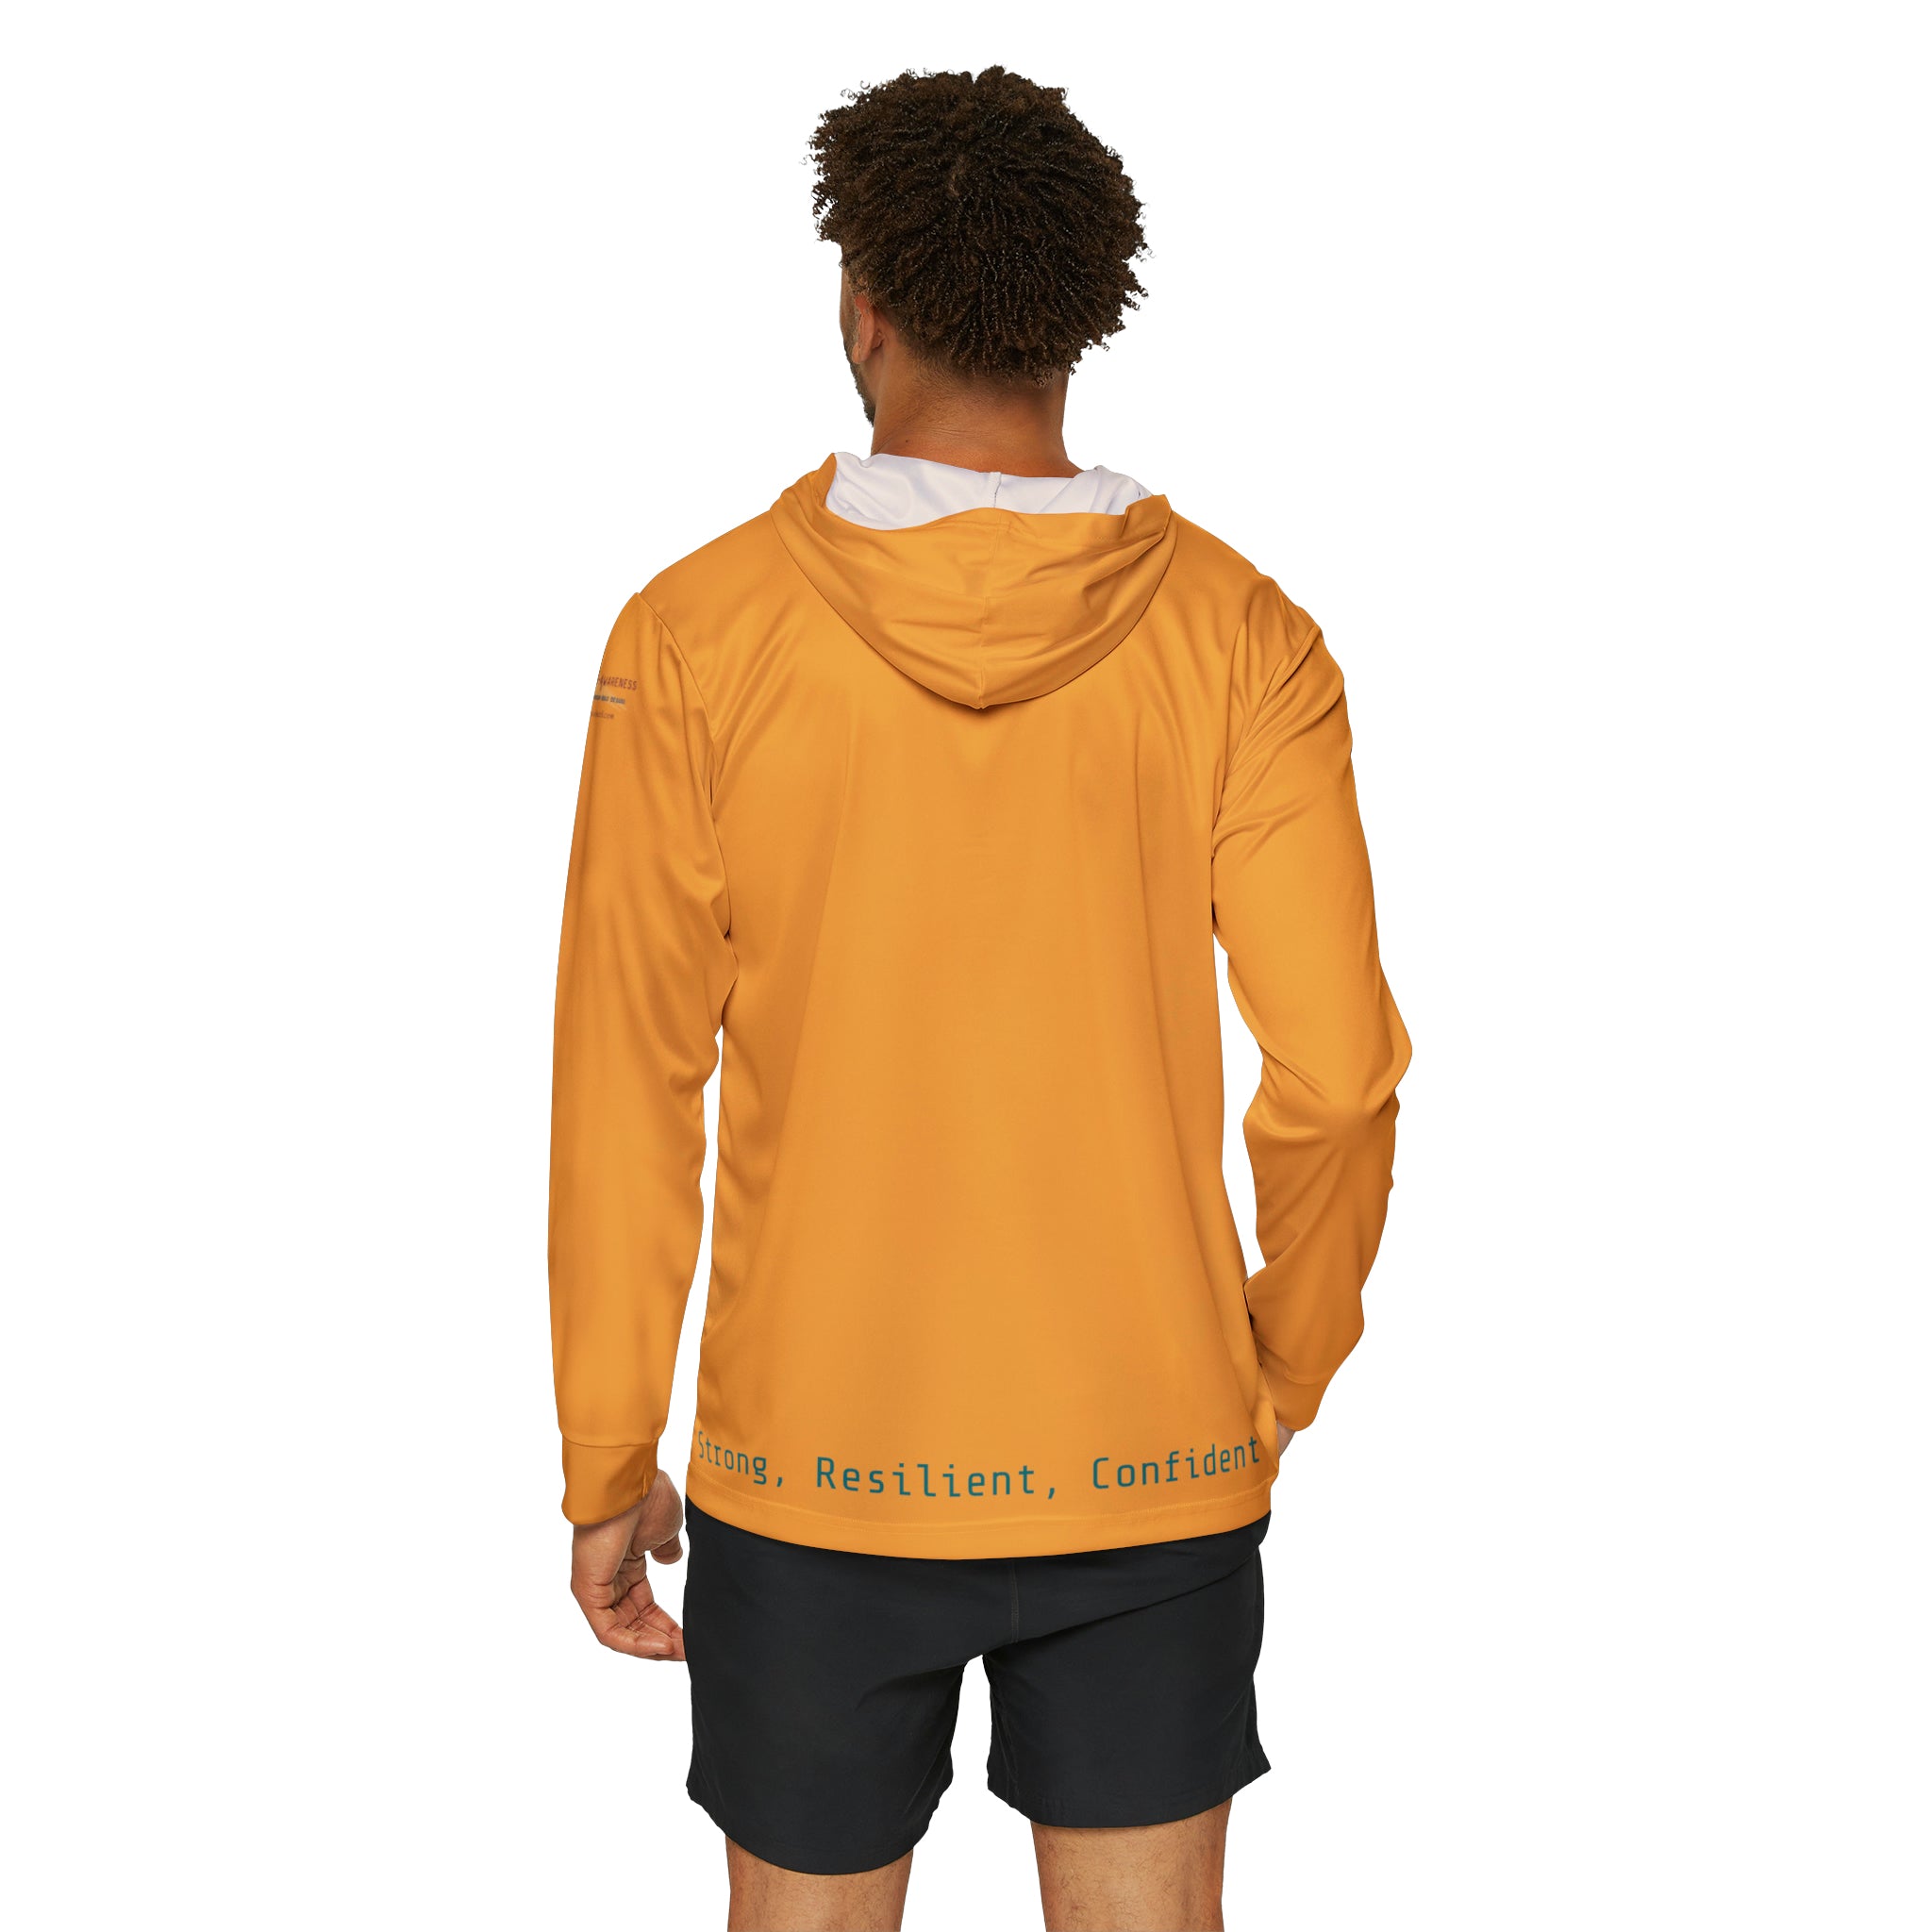 Unstoppable Men's Warmup Hoodie: Break Barriers Activewear Durable Fabric Made in USA Men's Hoodie Mental Health Support Moisture-wicking Performance Apparel Quality Control Sports Warmup UPF 50+ All Over Prints 5022579477049981204_2048 Printify